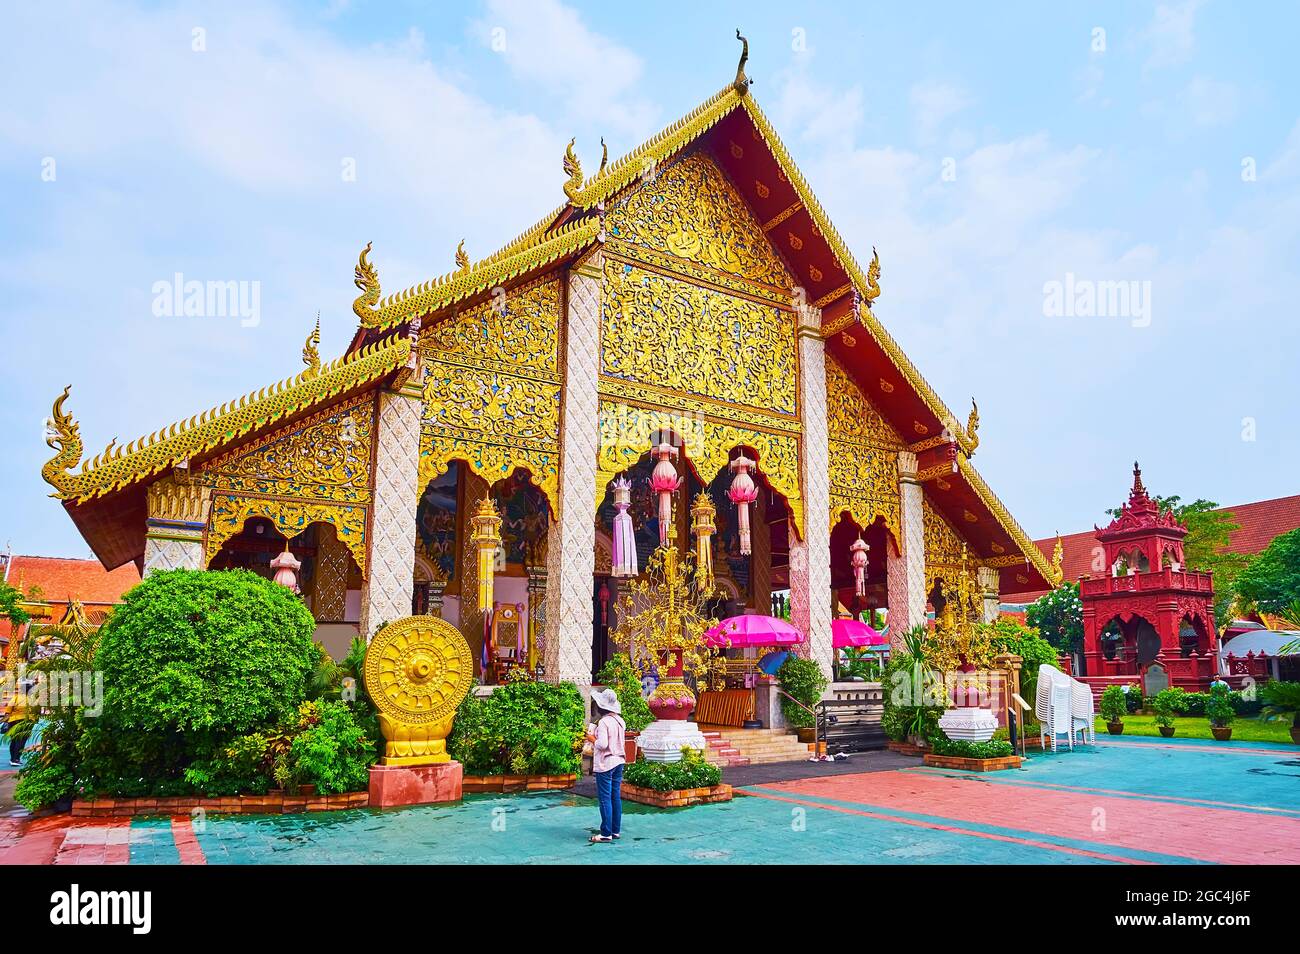 The outstanding golden decorations of the Viharn Luang og Wat Phra That Hariphunchai Temple, Lamphun, Thailand Stock Photo